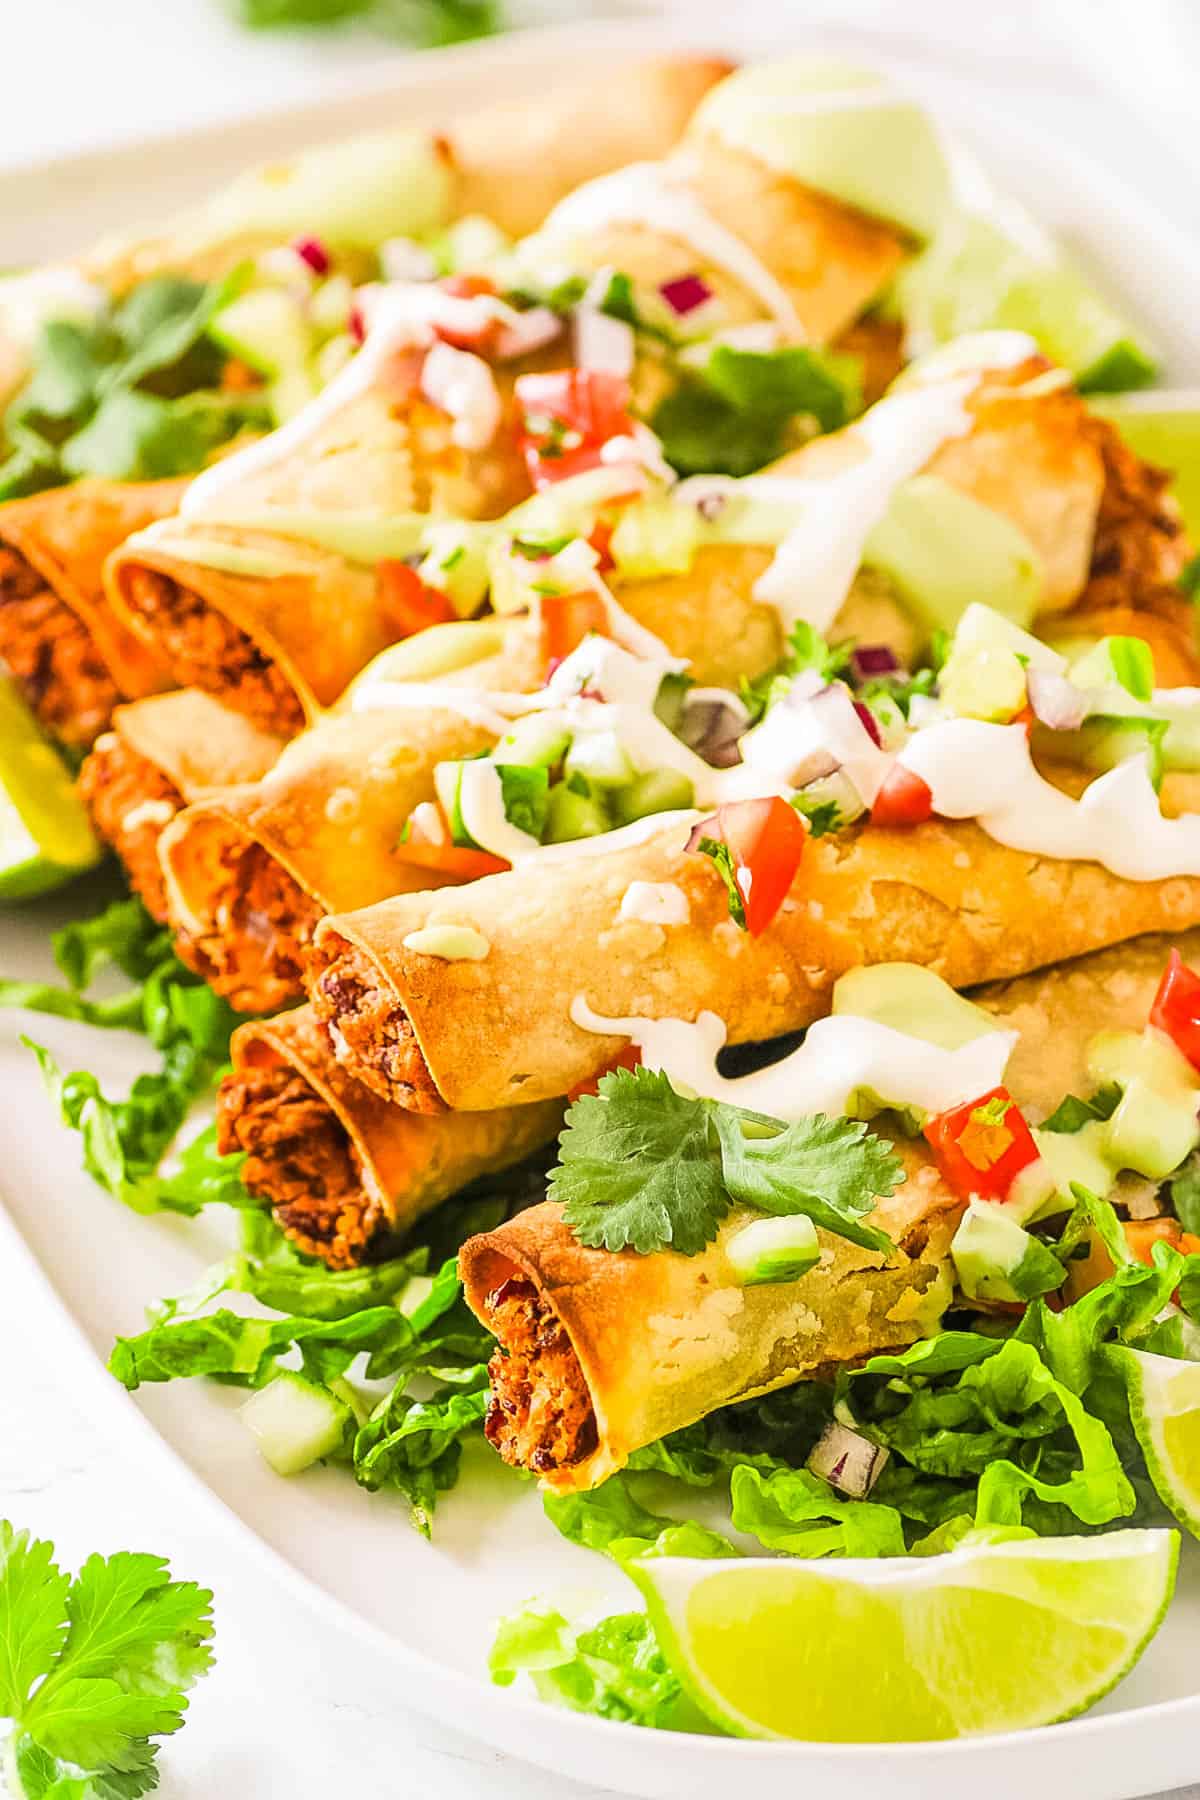 Baked vegan taquitos topped with vegan sour cream, salsa and served on a white platter with lettuce and limes.